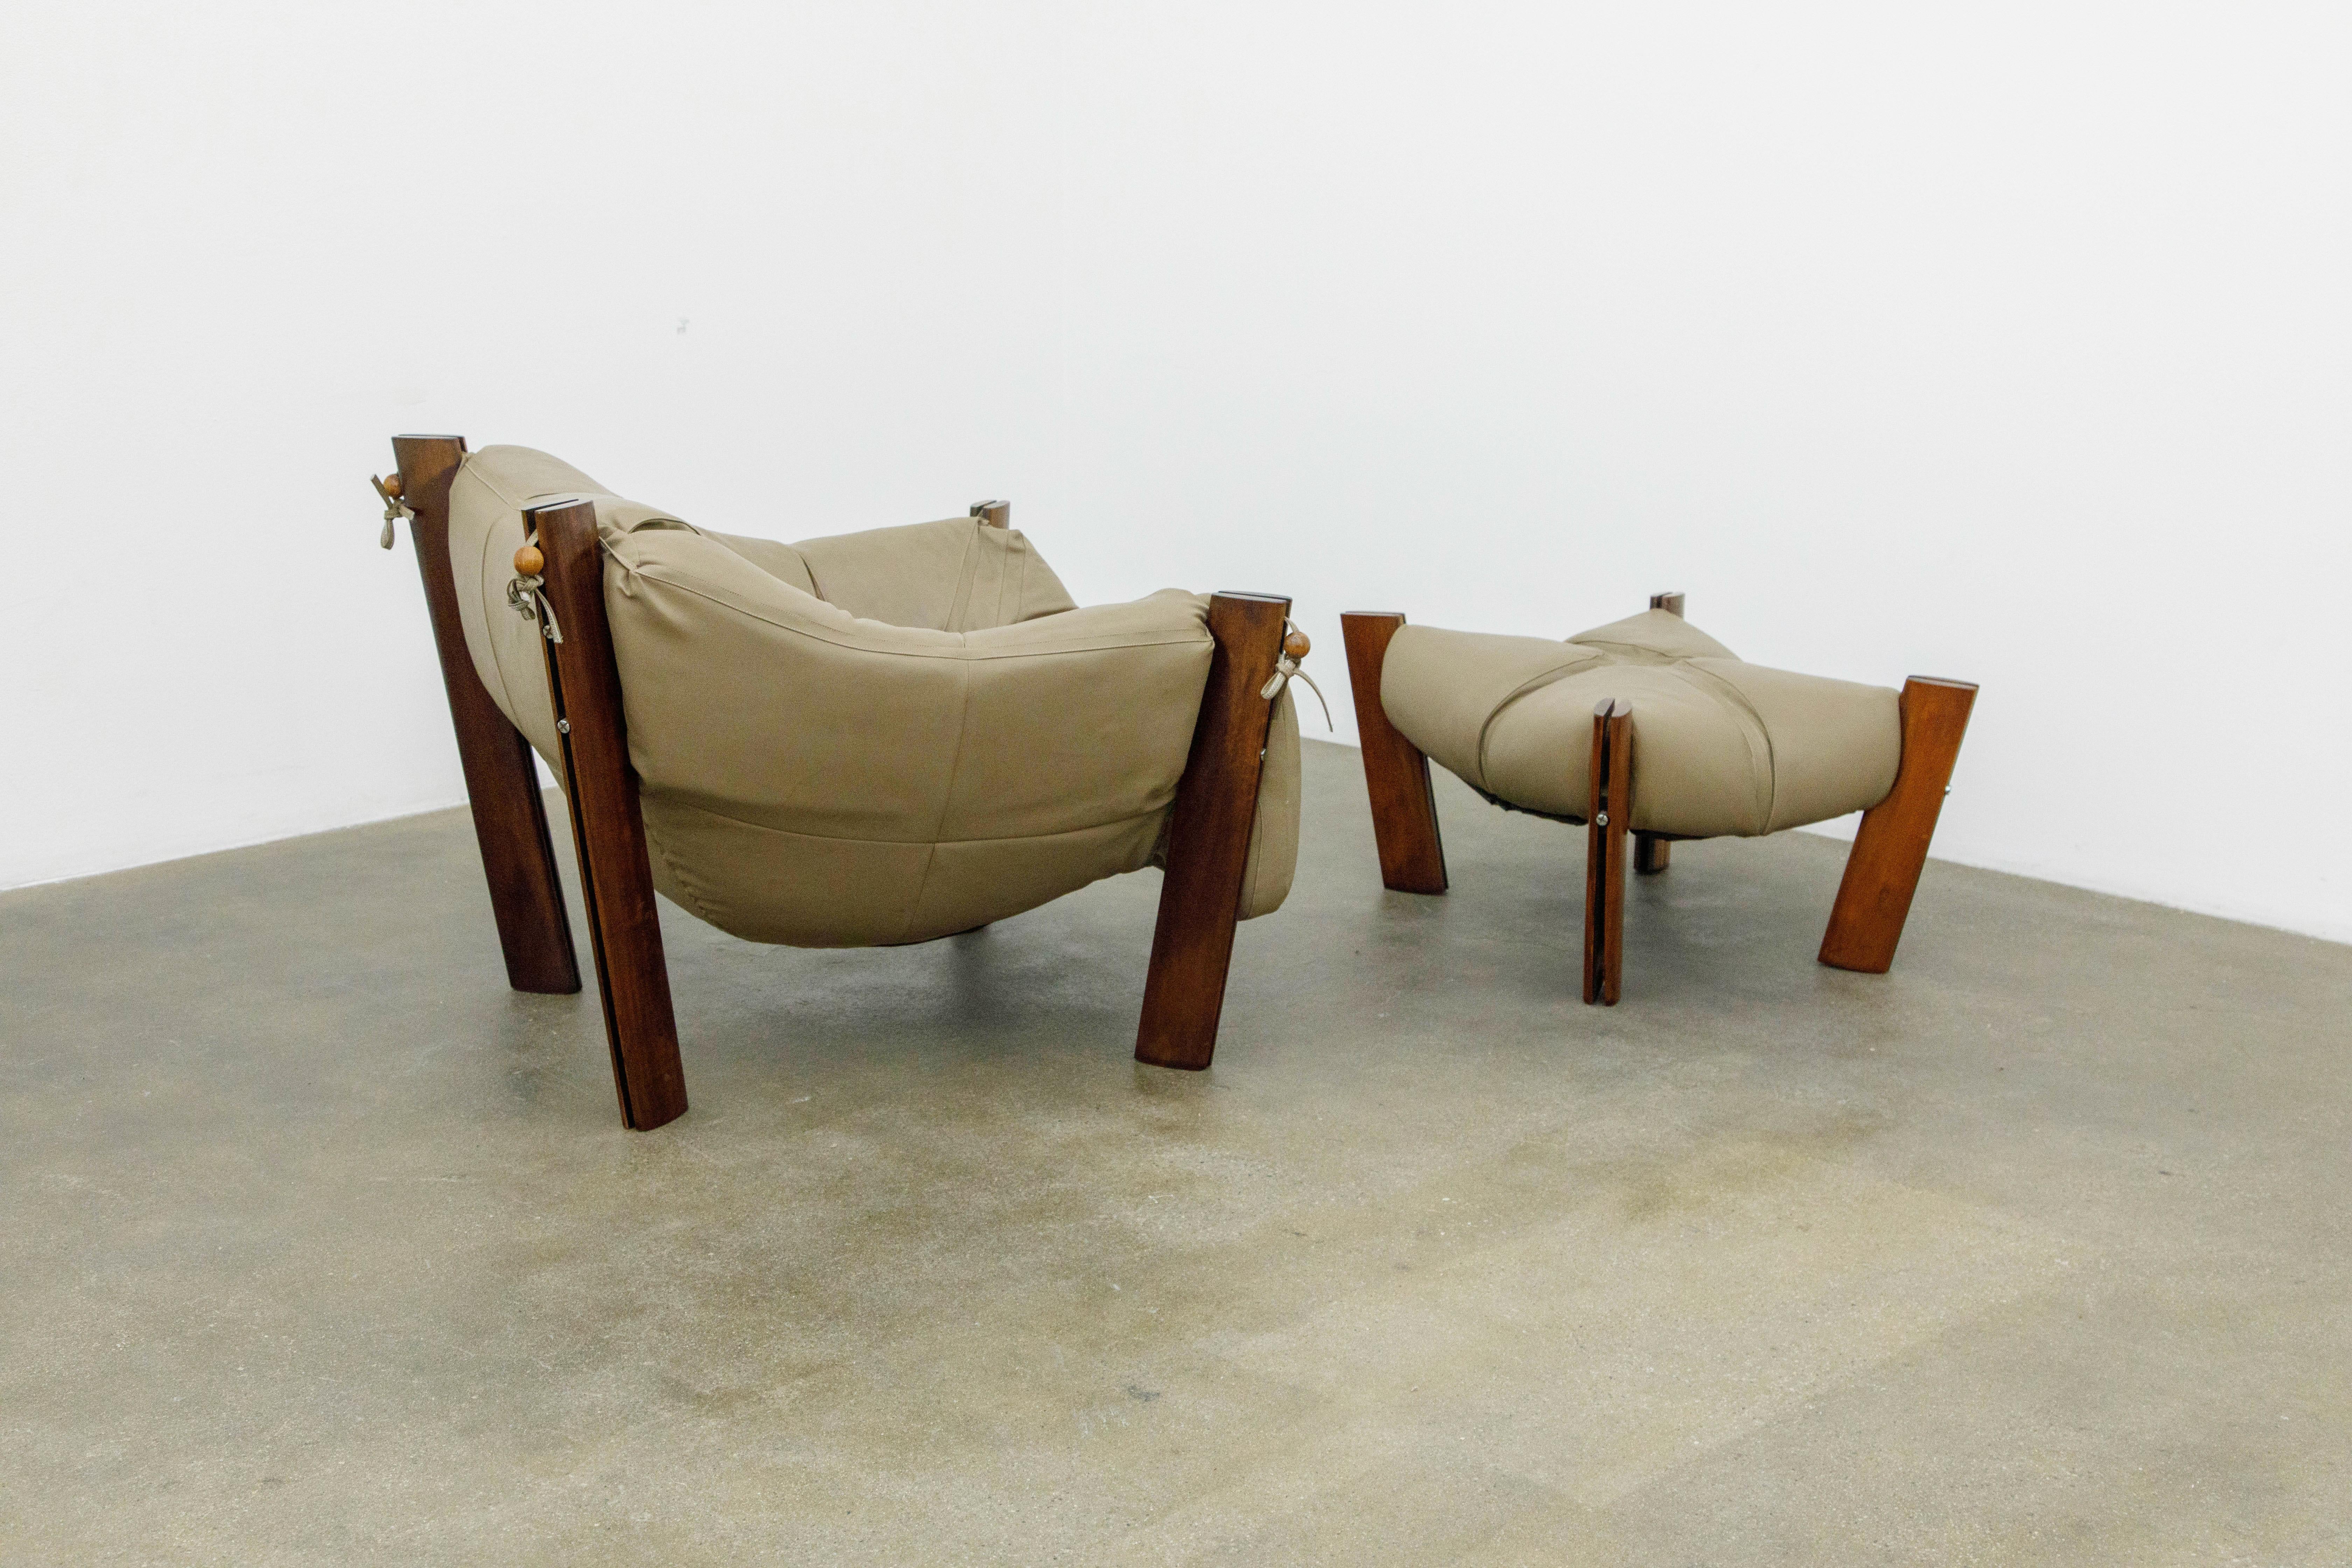 Faux Leather Percival Lafer 'MP-211' Armchairs and Ottoman, Brazil circa 1960s, Signed